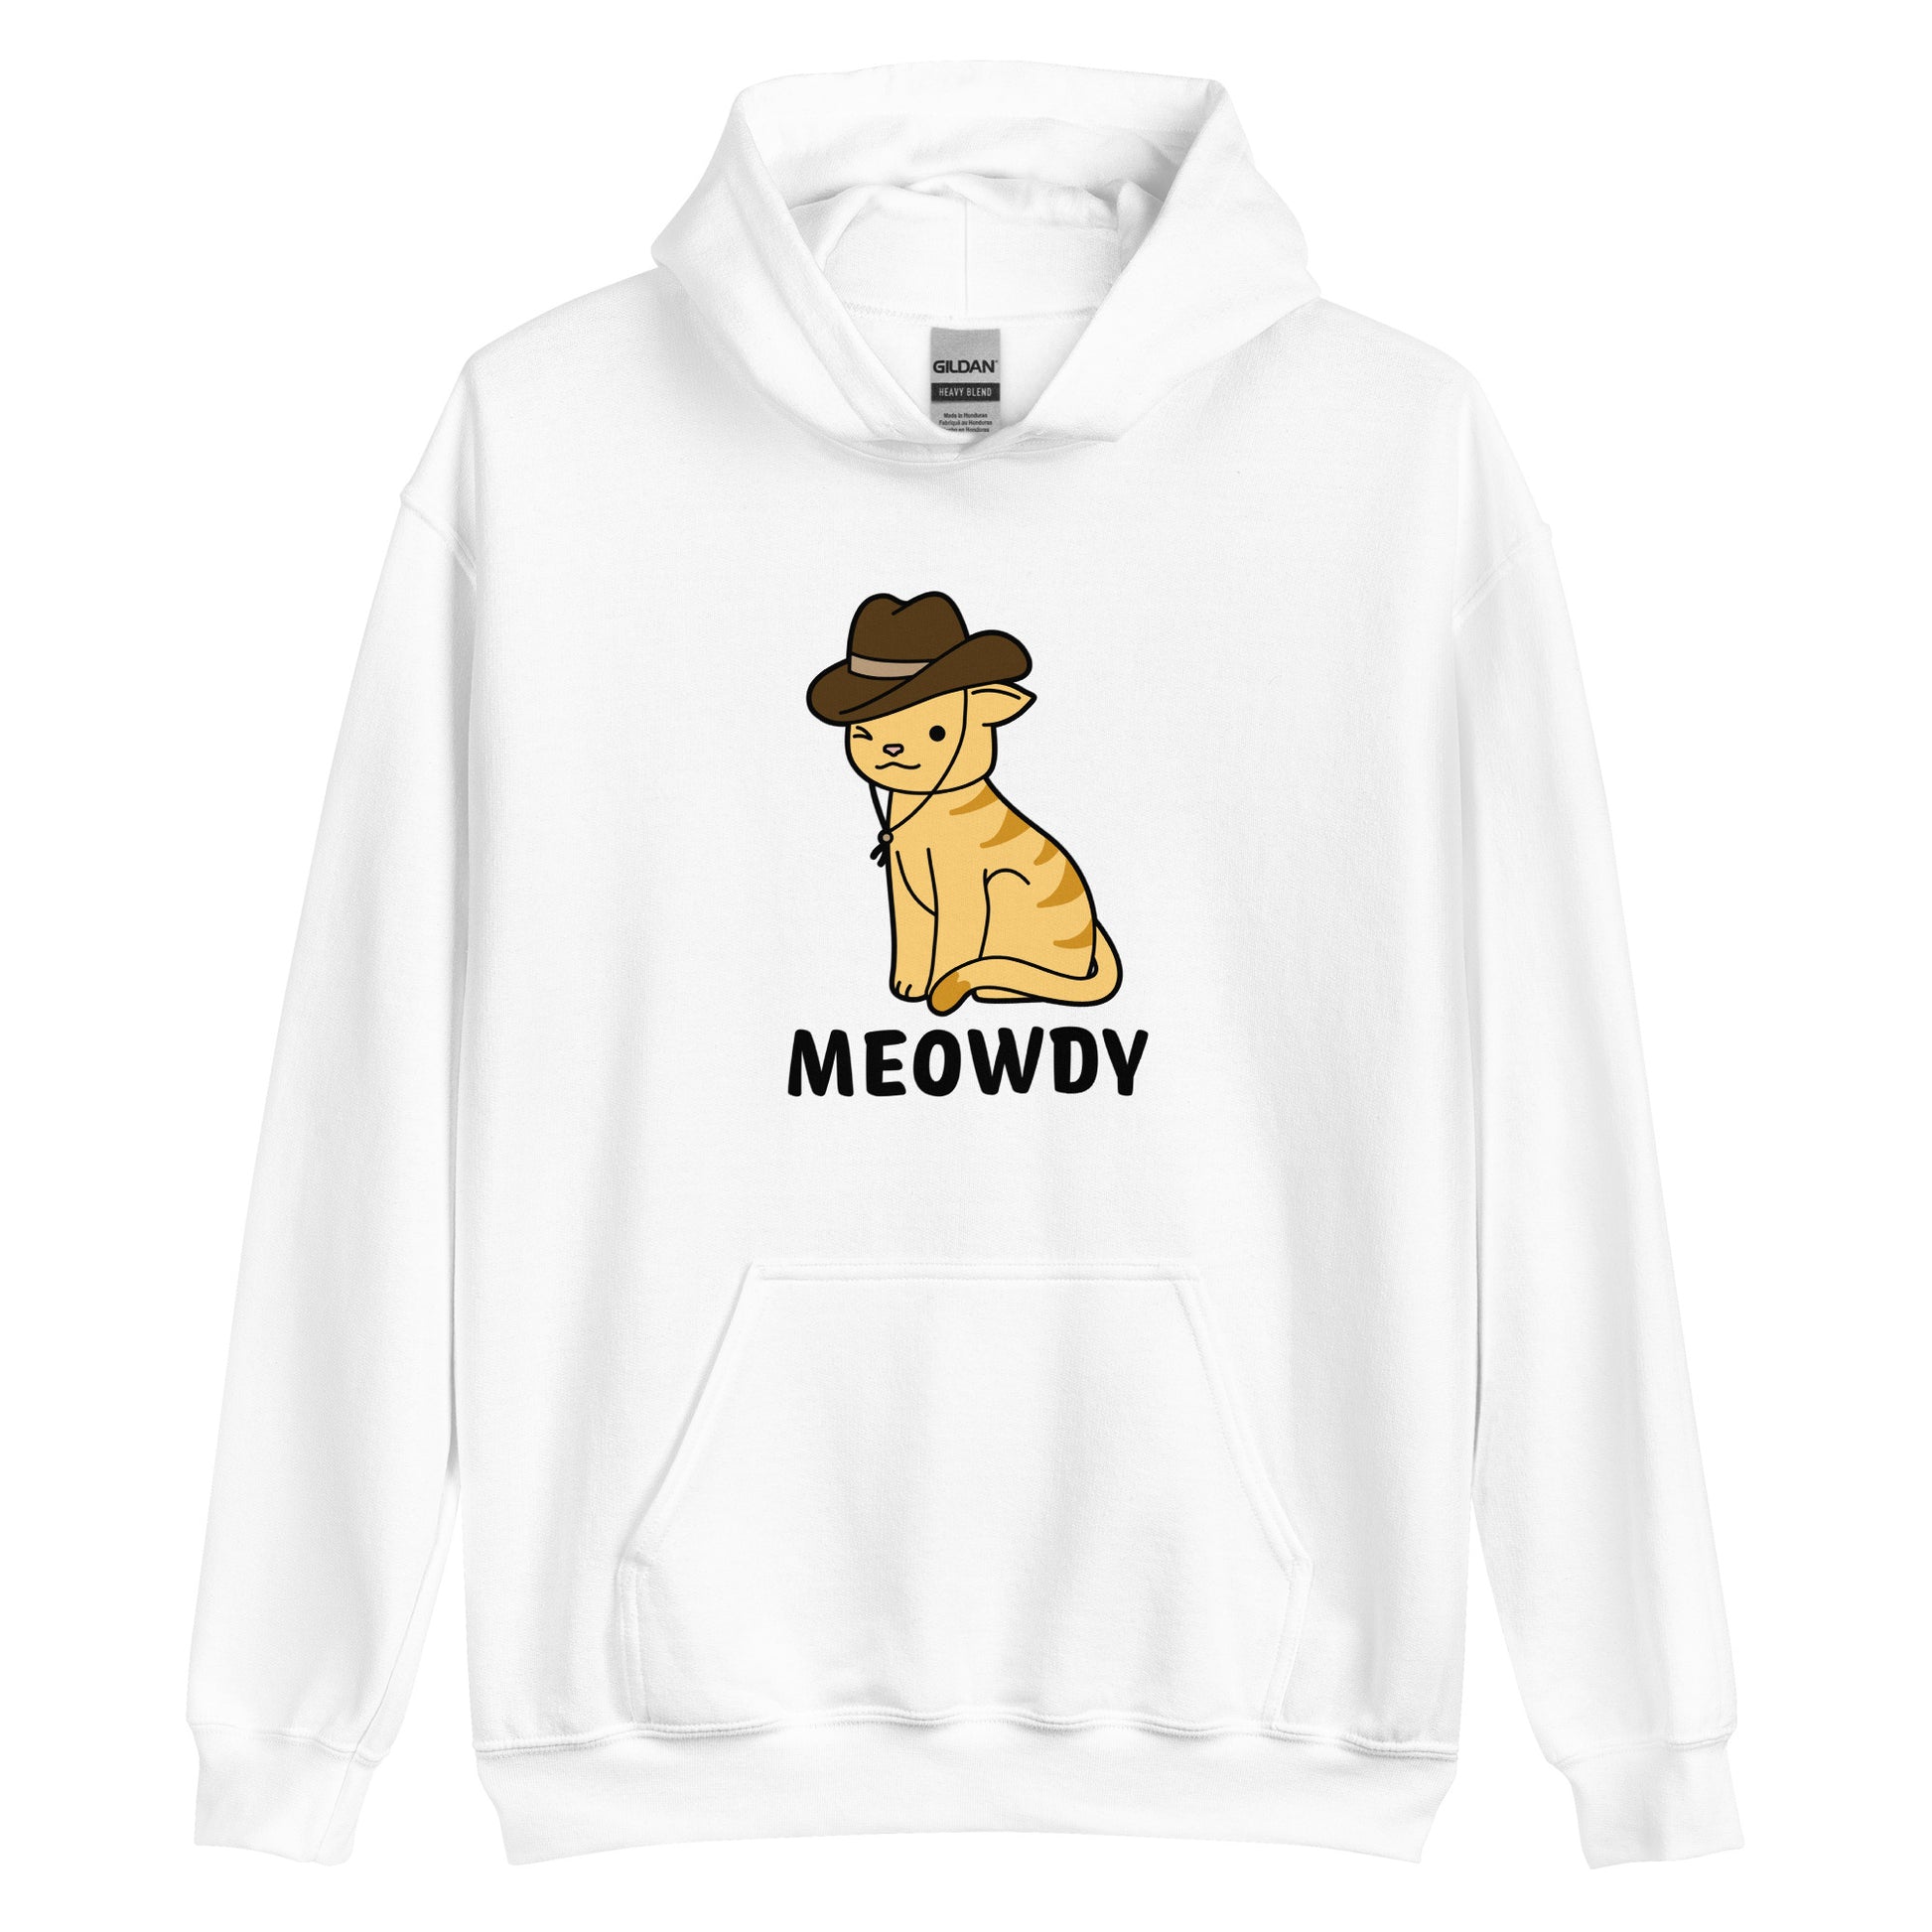 A white hooded sweatshirt featuring a cartoon drawing of an orange striped cat. The cat is winking and wearing a cowboy hat. Text beneath the cat reads "Meowdy"